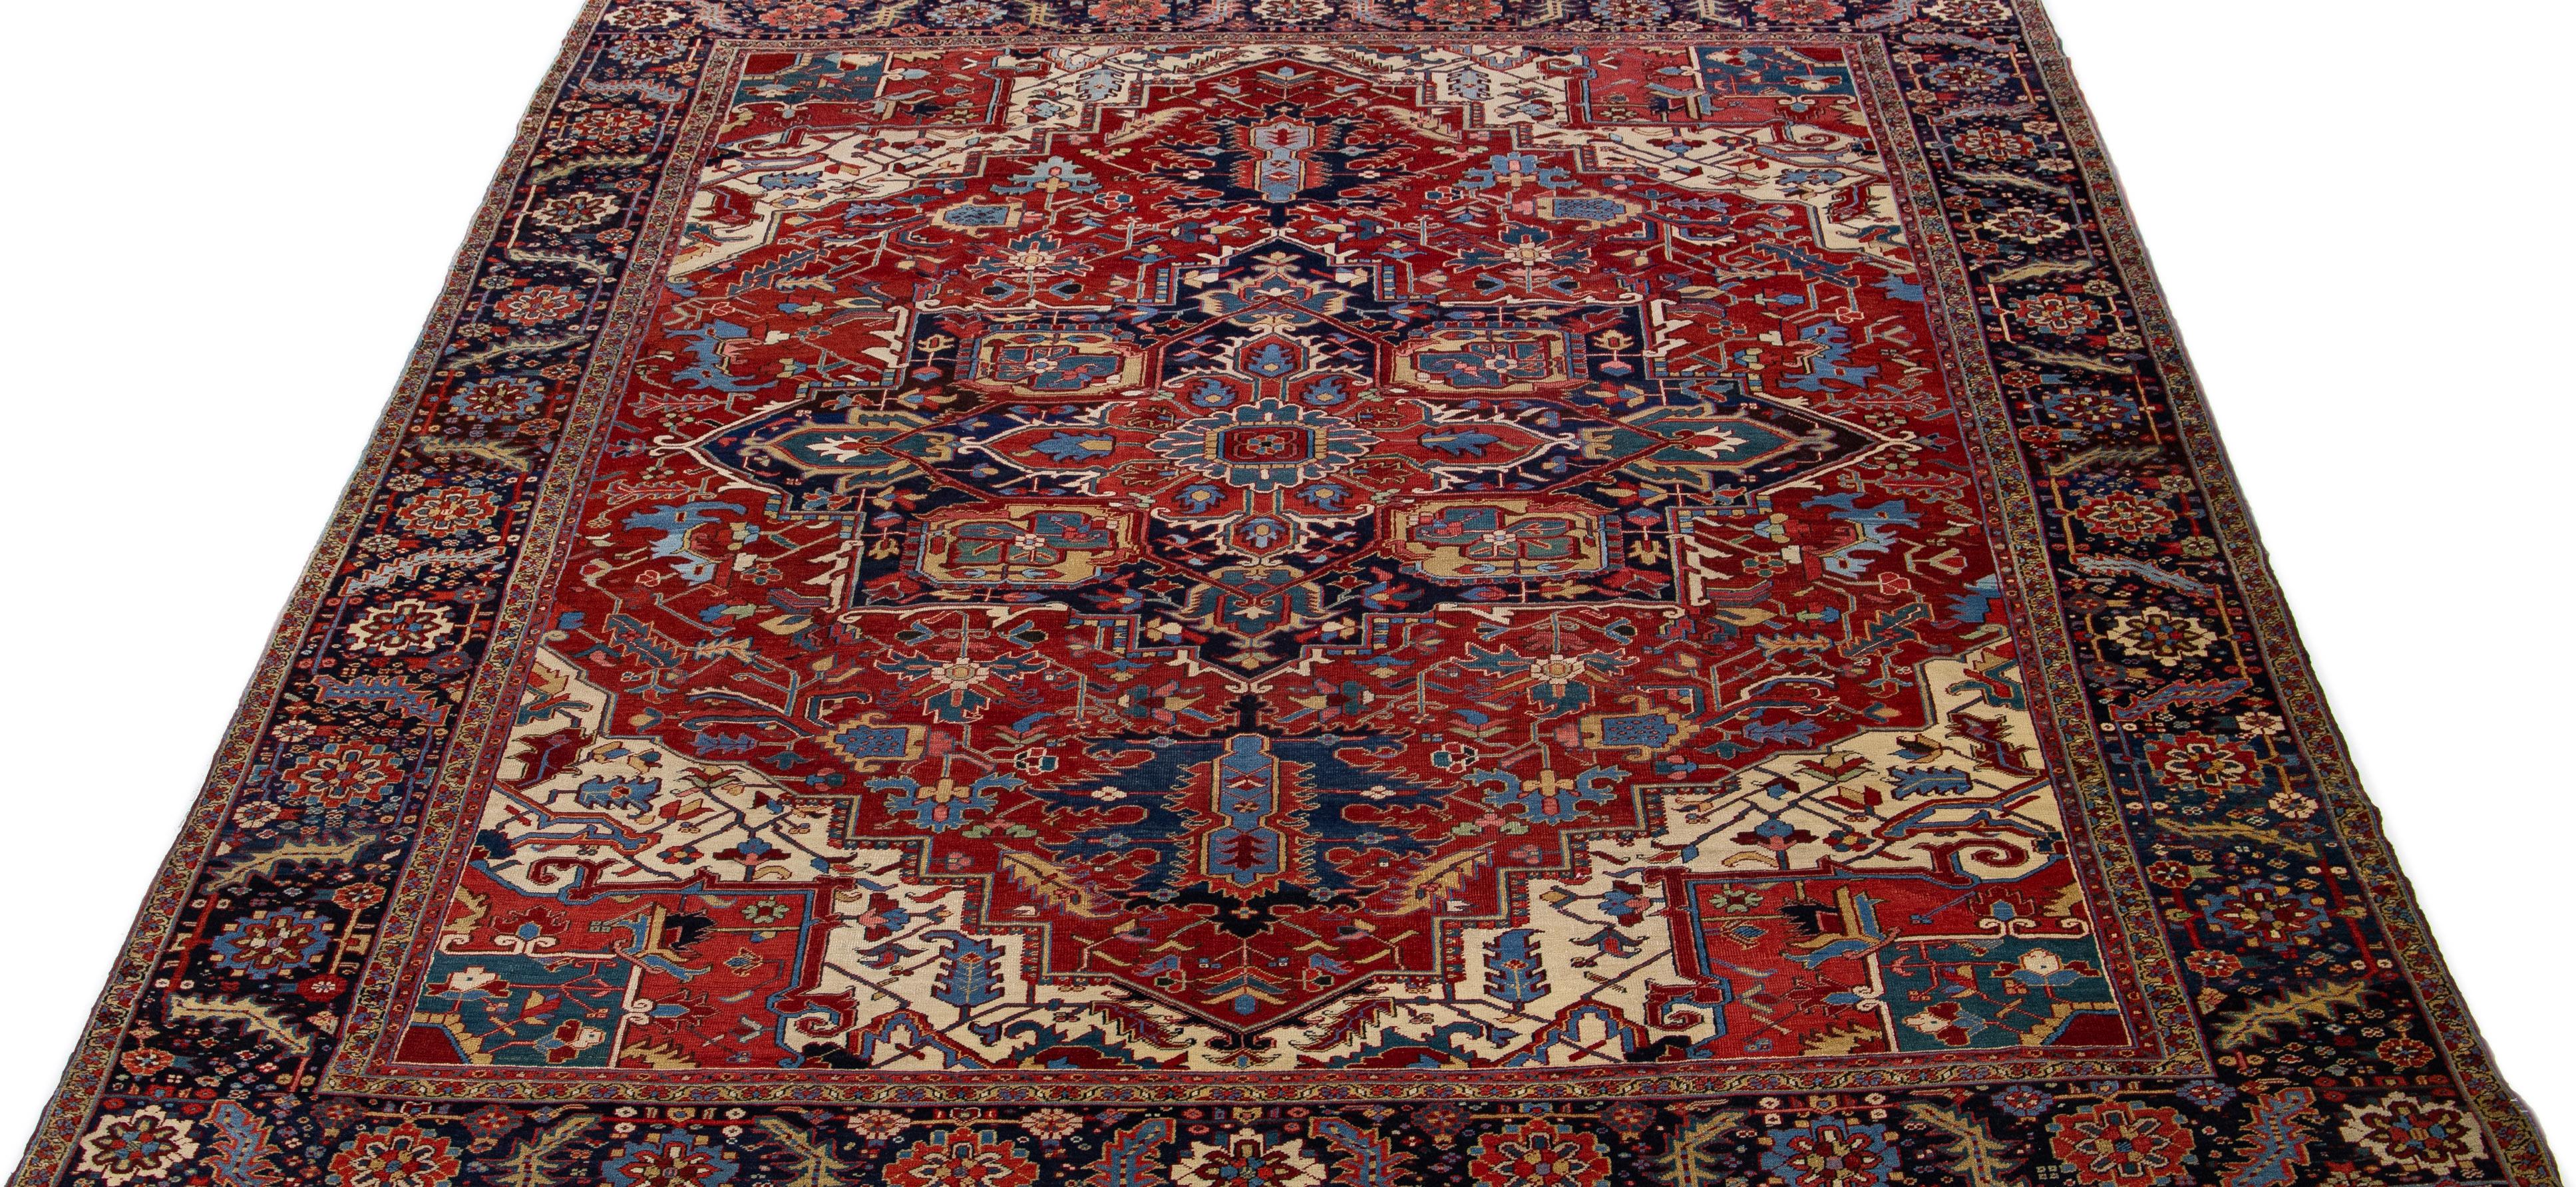 20th Century Antique Persian Heriz Wool Rug Handmade with Red Medallion Design For Sale